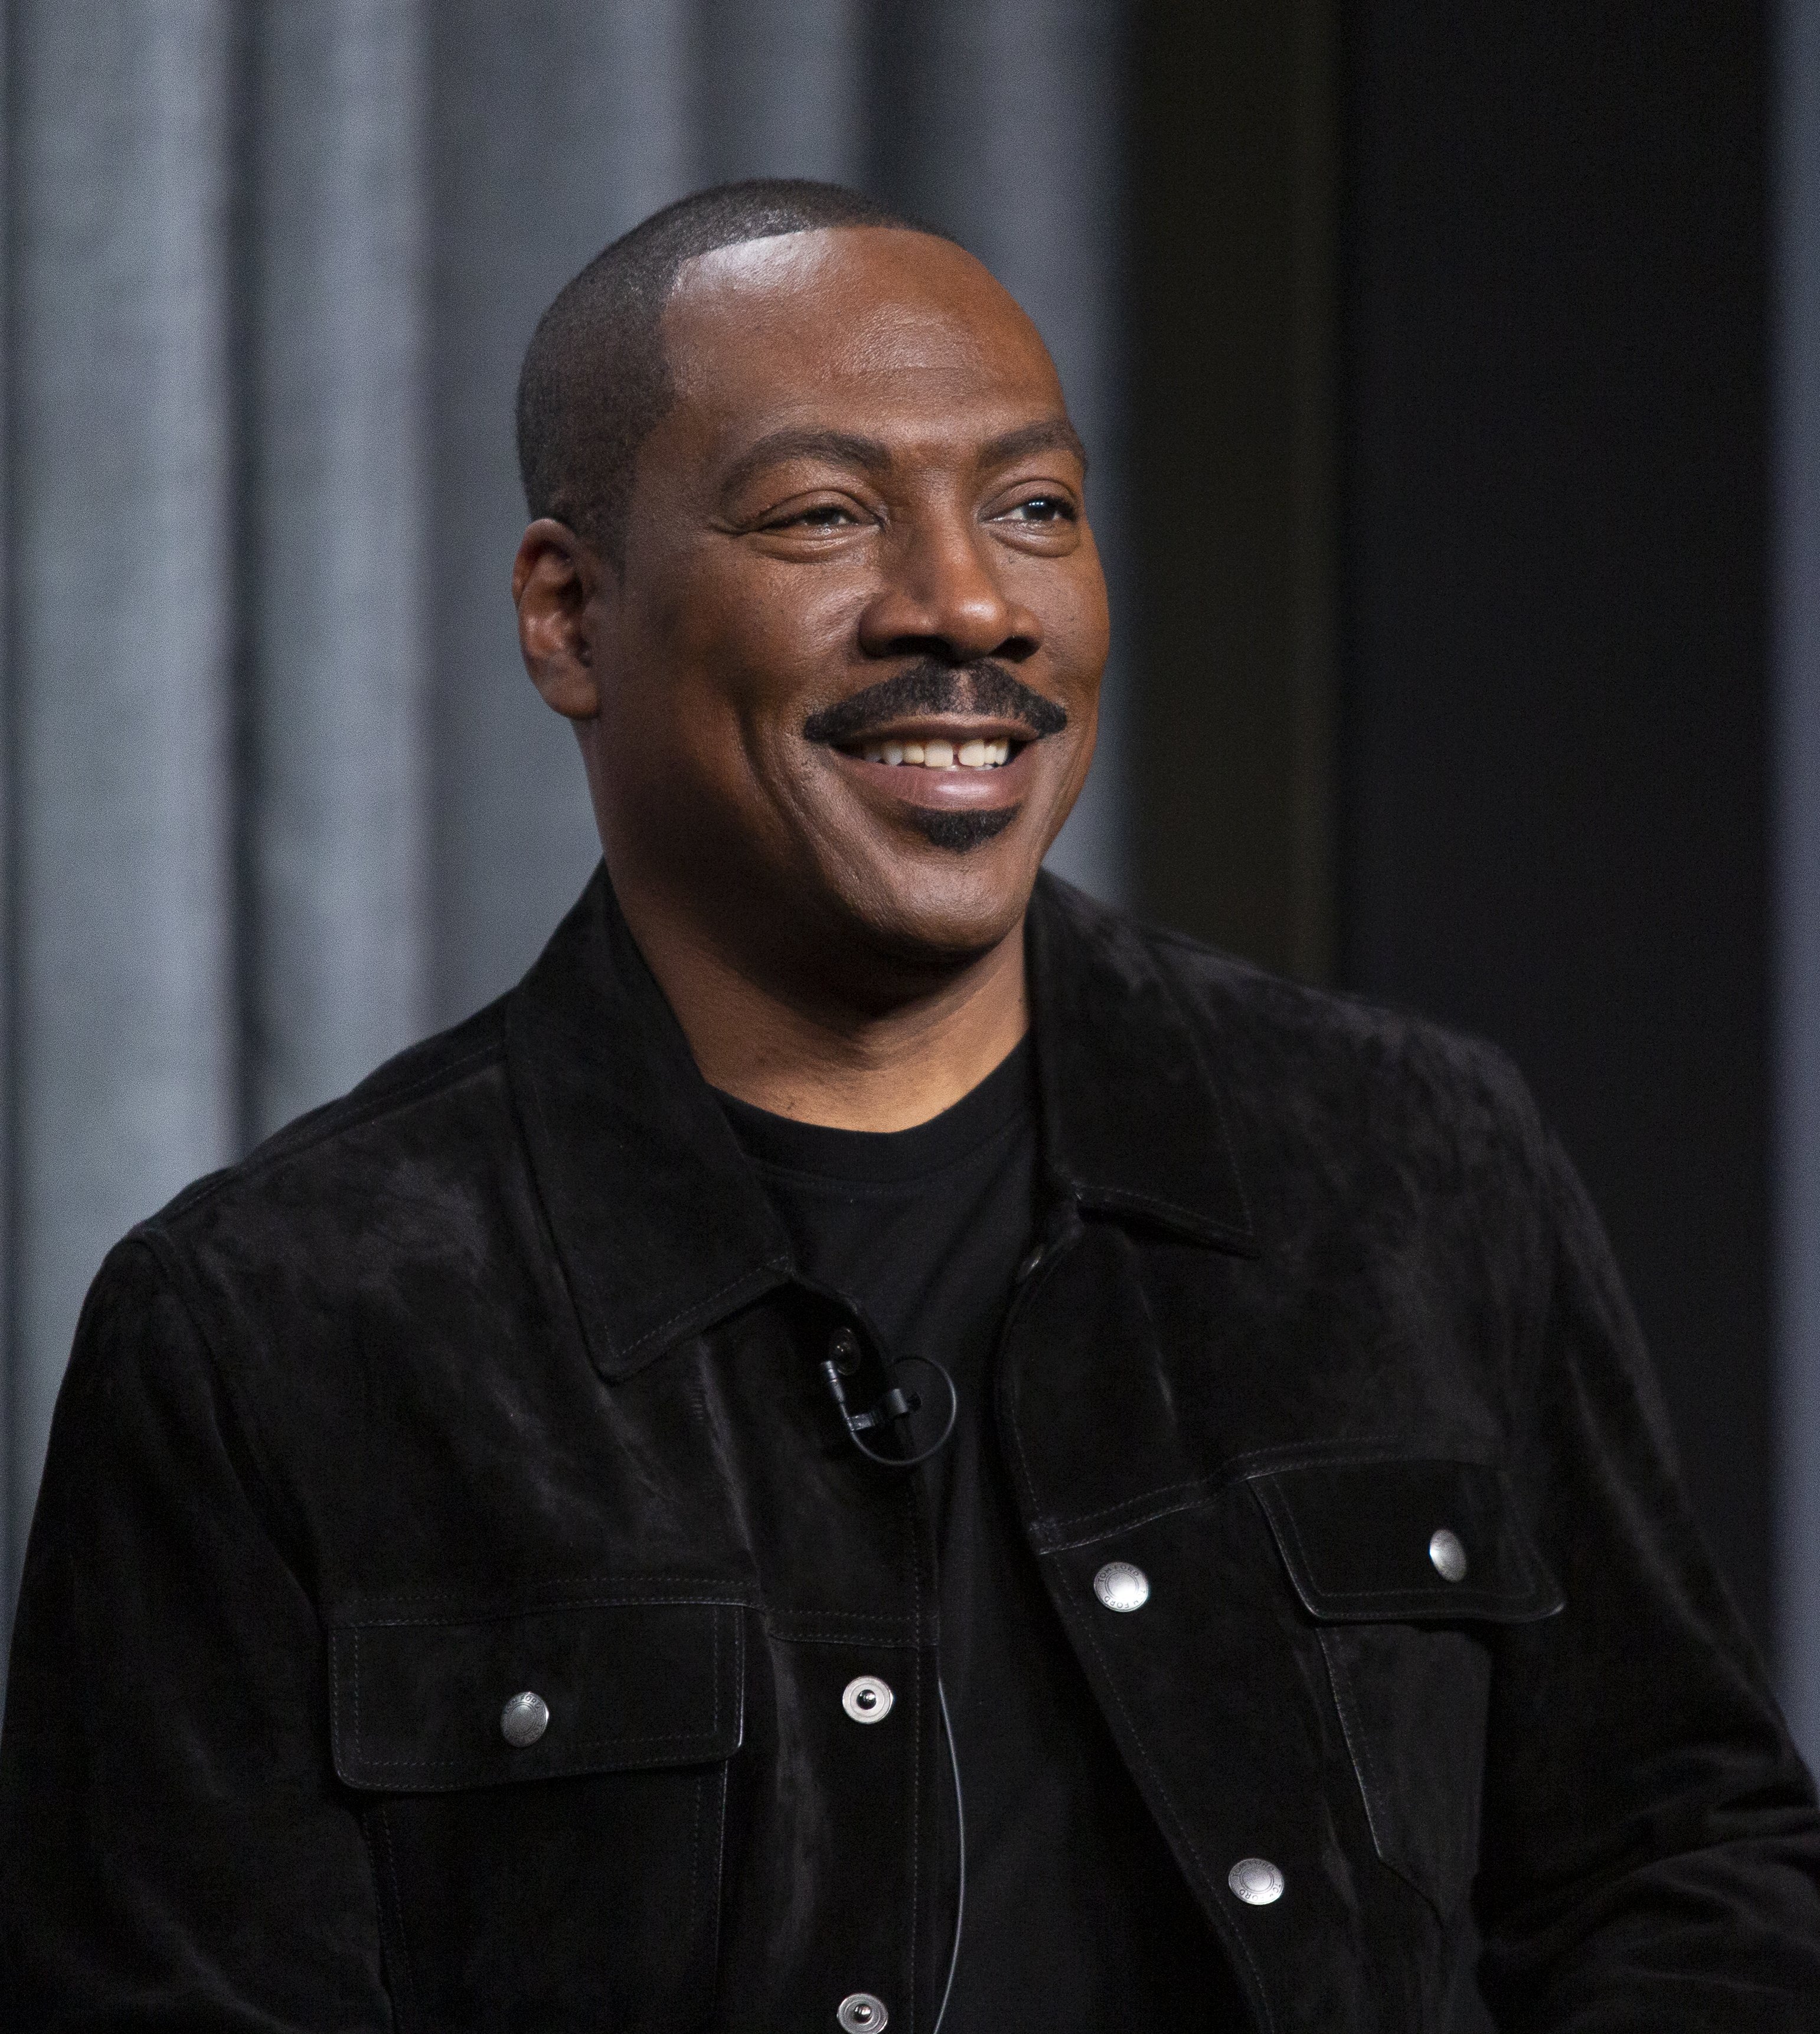 Eddie Murphy during his appearance on SAG-AFTRA Foundation's "Conversations" in  2019. | Photo: Getty Images 